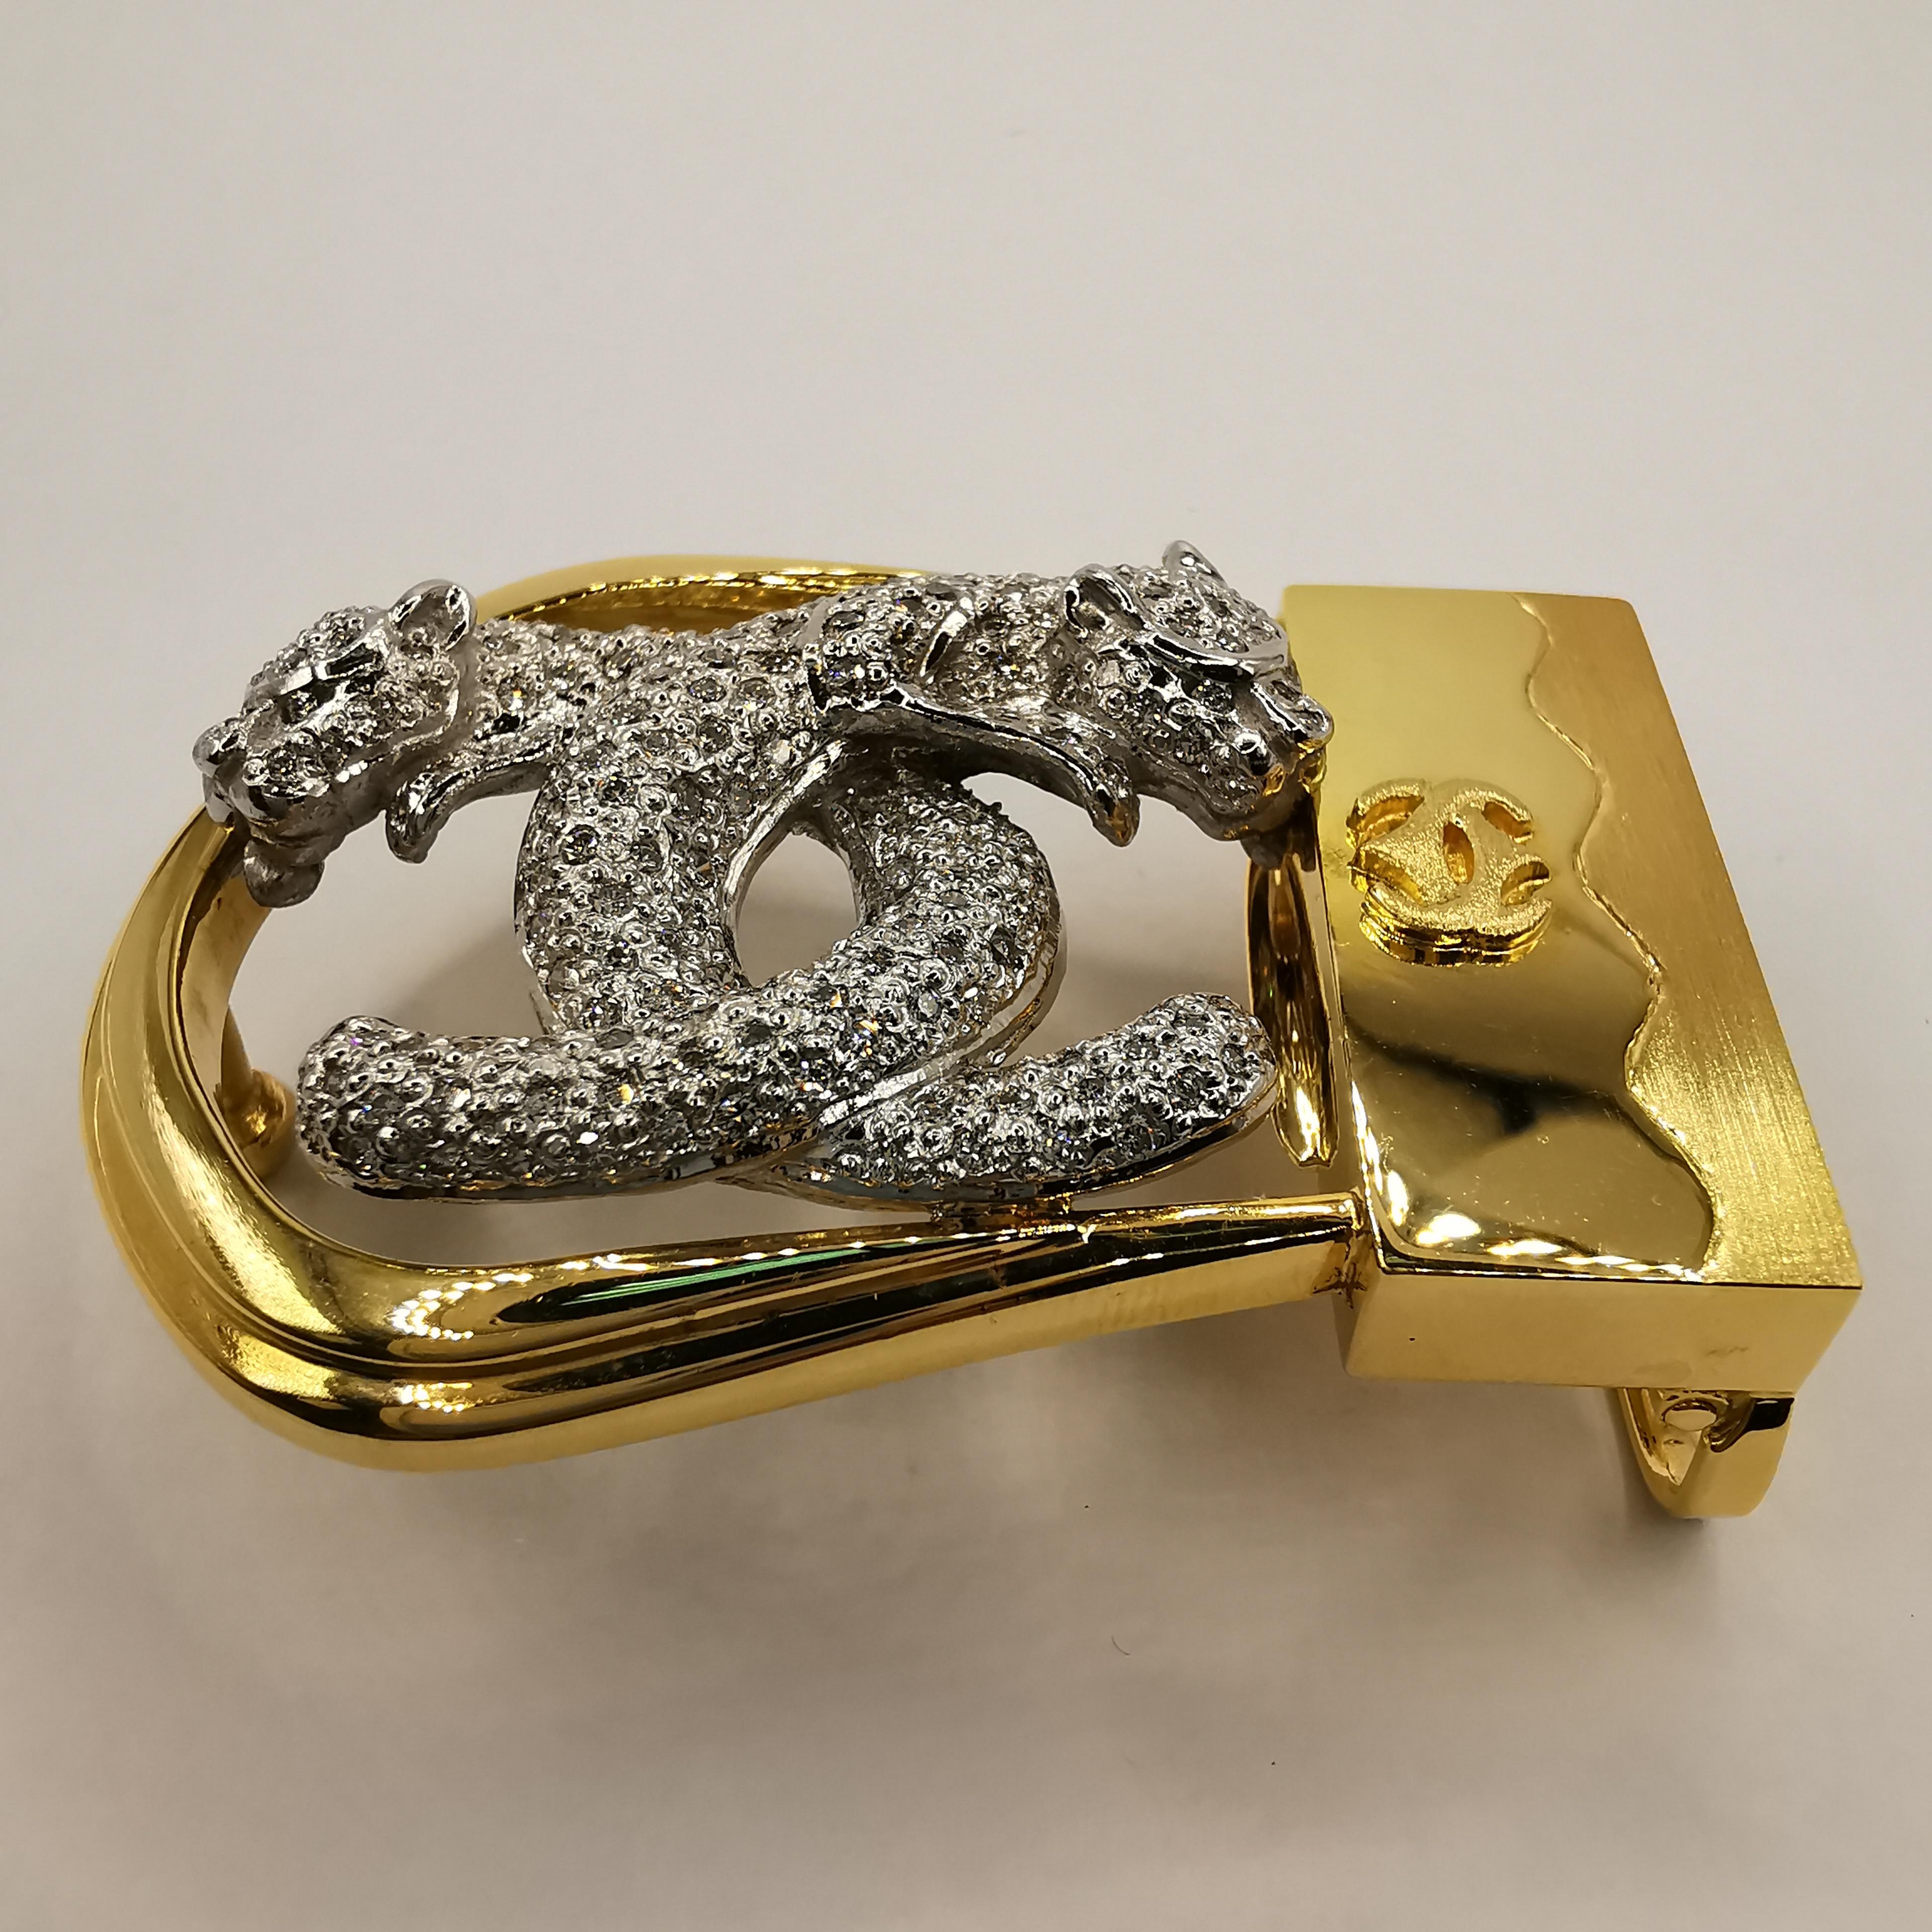 Add a touch of luxury and glamour to your style with this Double Jaguar 1.74 Carat Diamond 3cm Belt Buckle in 18K Yellow & White Gold. Meticulously crafted from high-quality 18K yellow and white gold, this buckle features two intertwined jaguars in